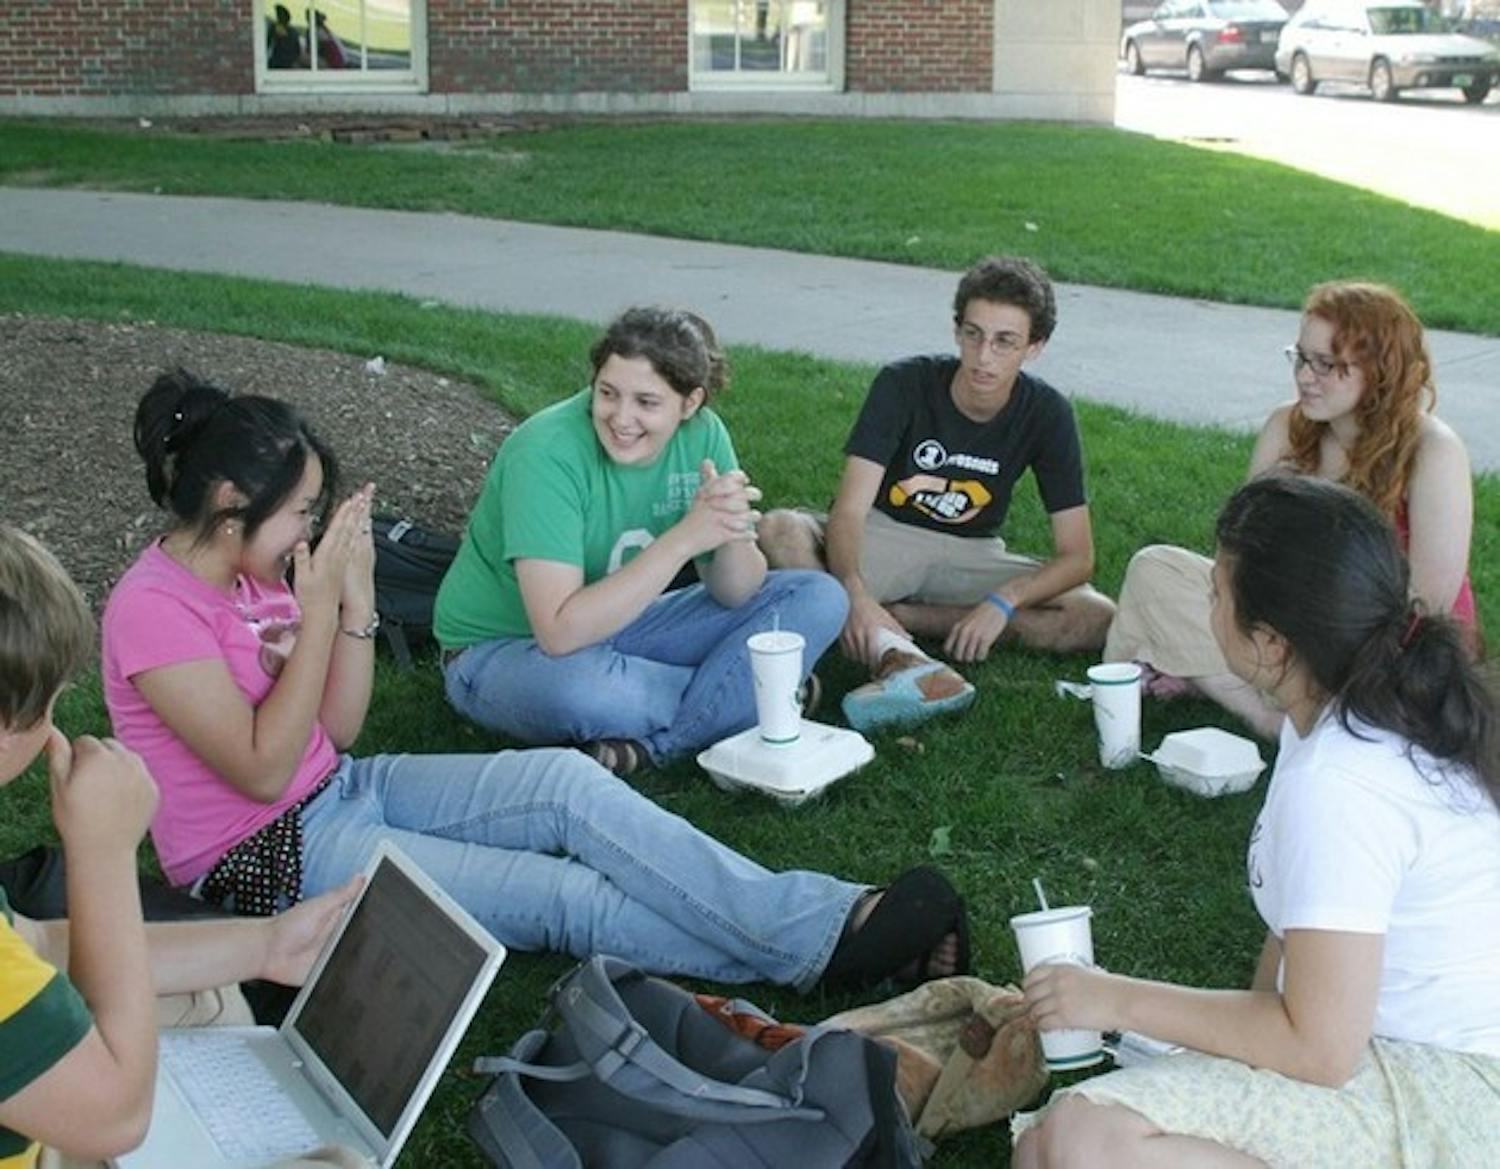 High school students attending the Dartmouth Debate Institute gather on the lawn of Robinson Hall Wednesday afternoon. Campers spend most of their time working and have little free time for partying or hanging out.